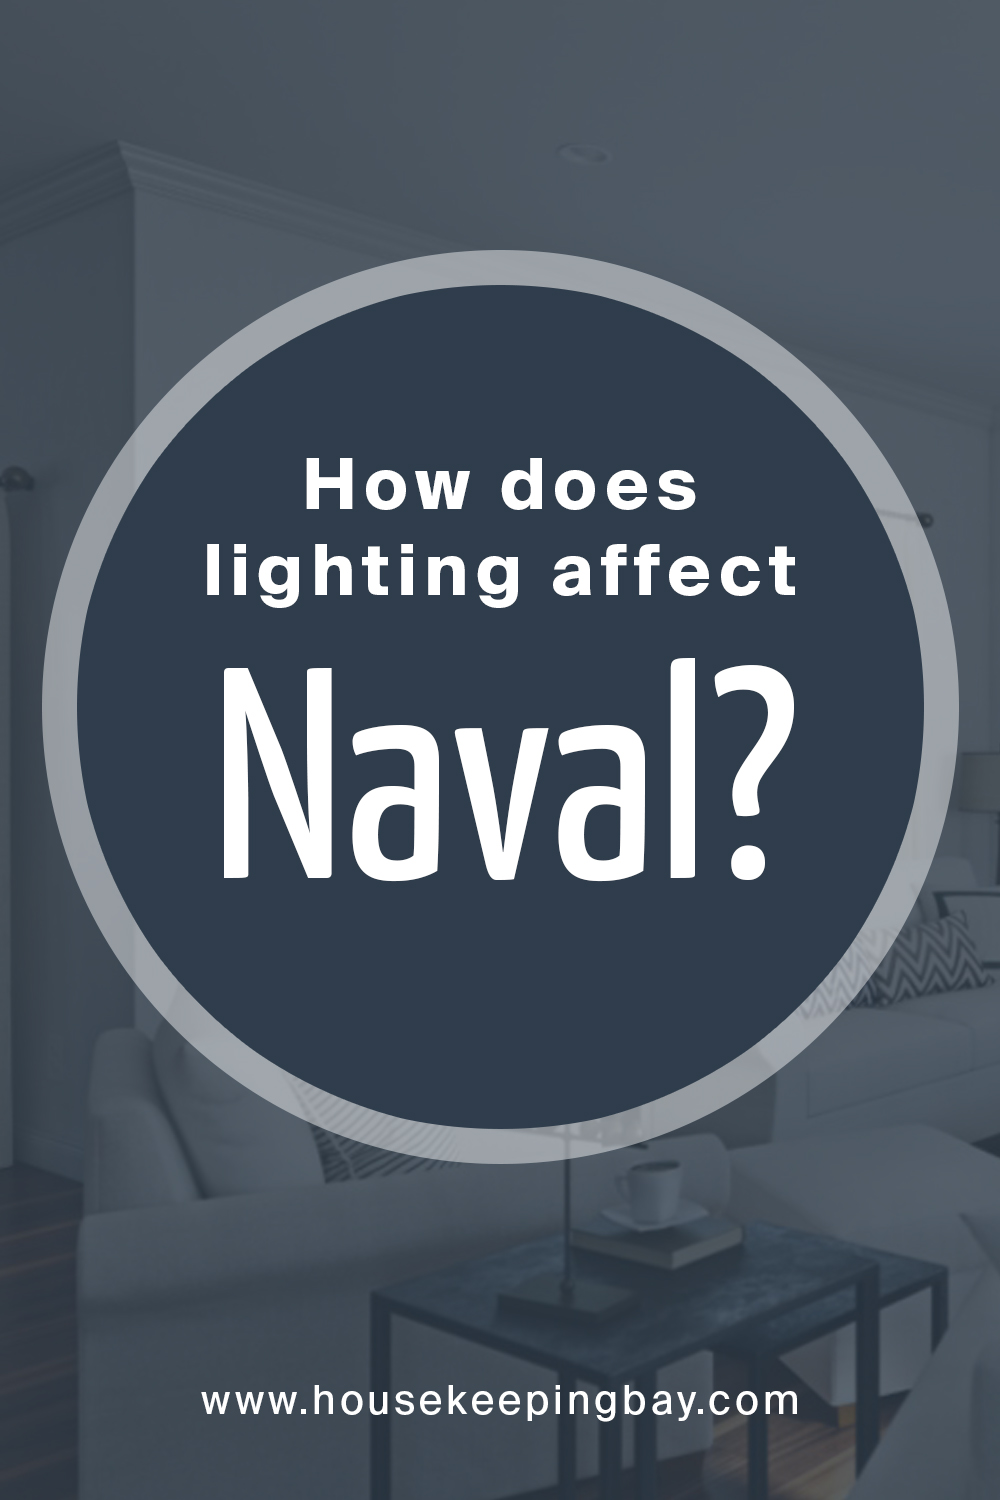 How does lighting affect Naval